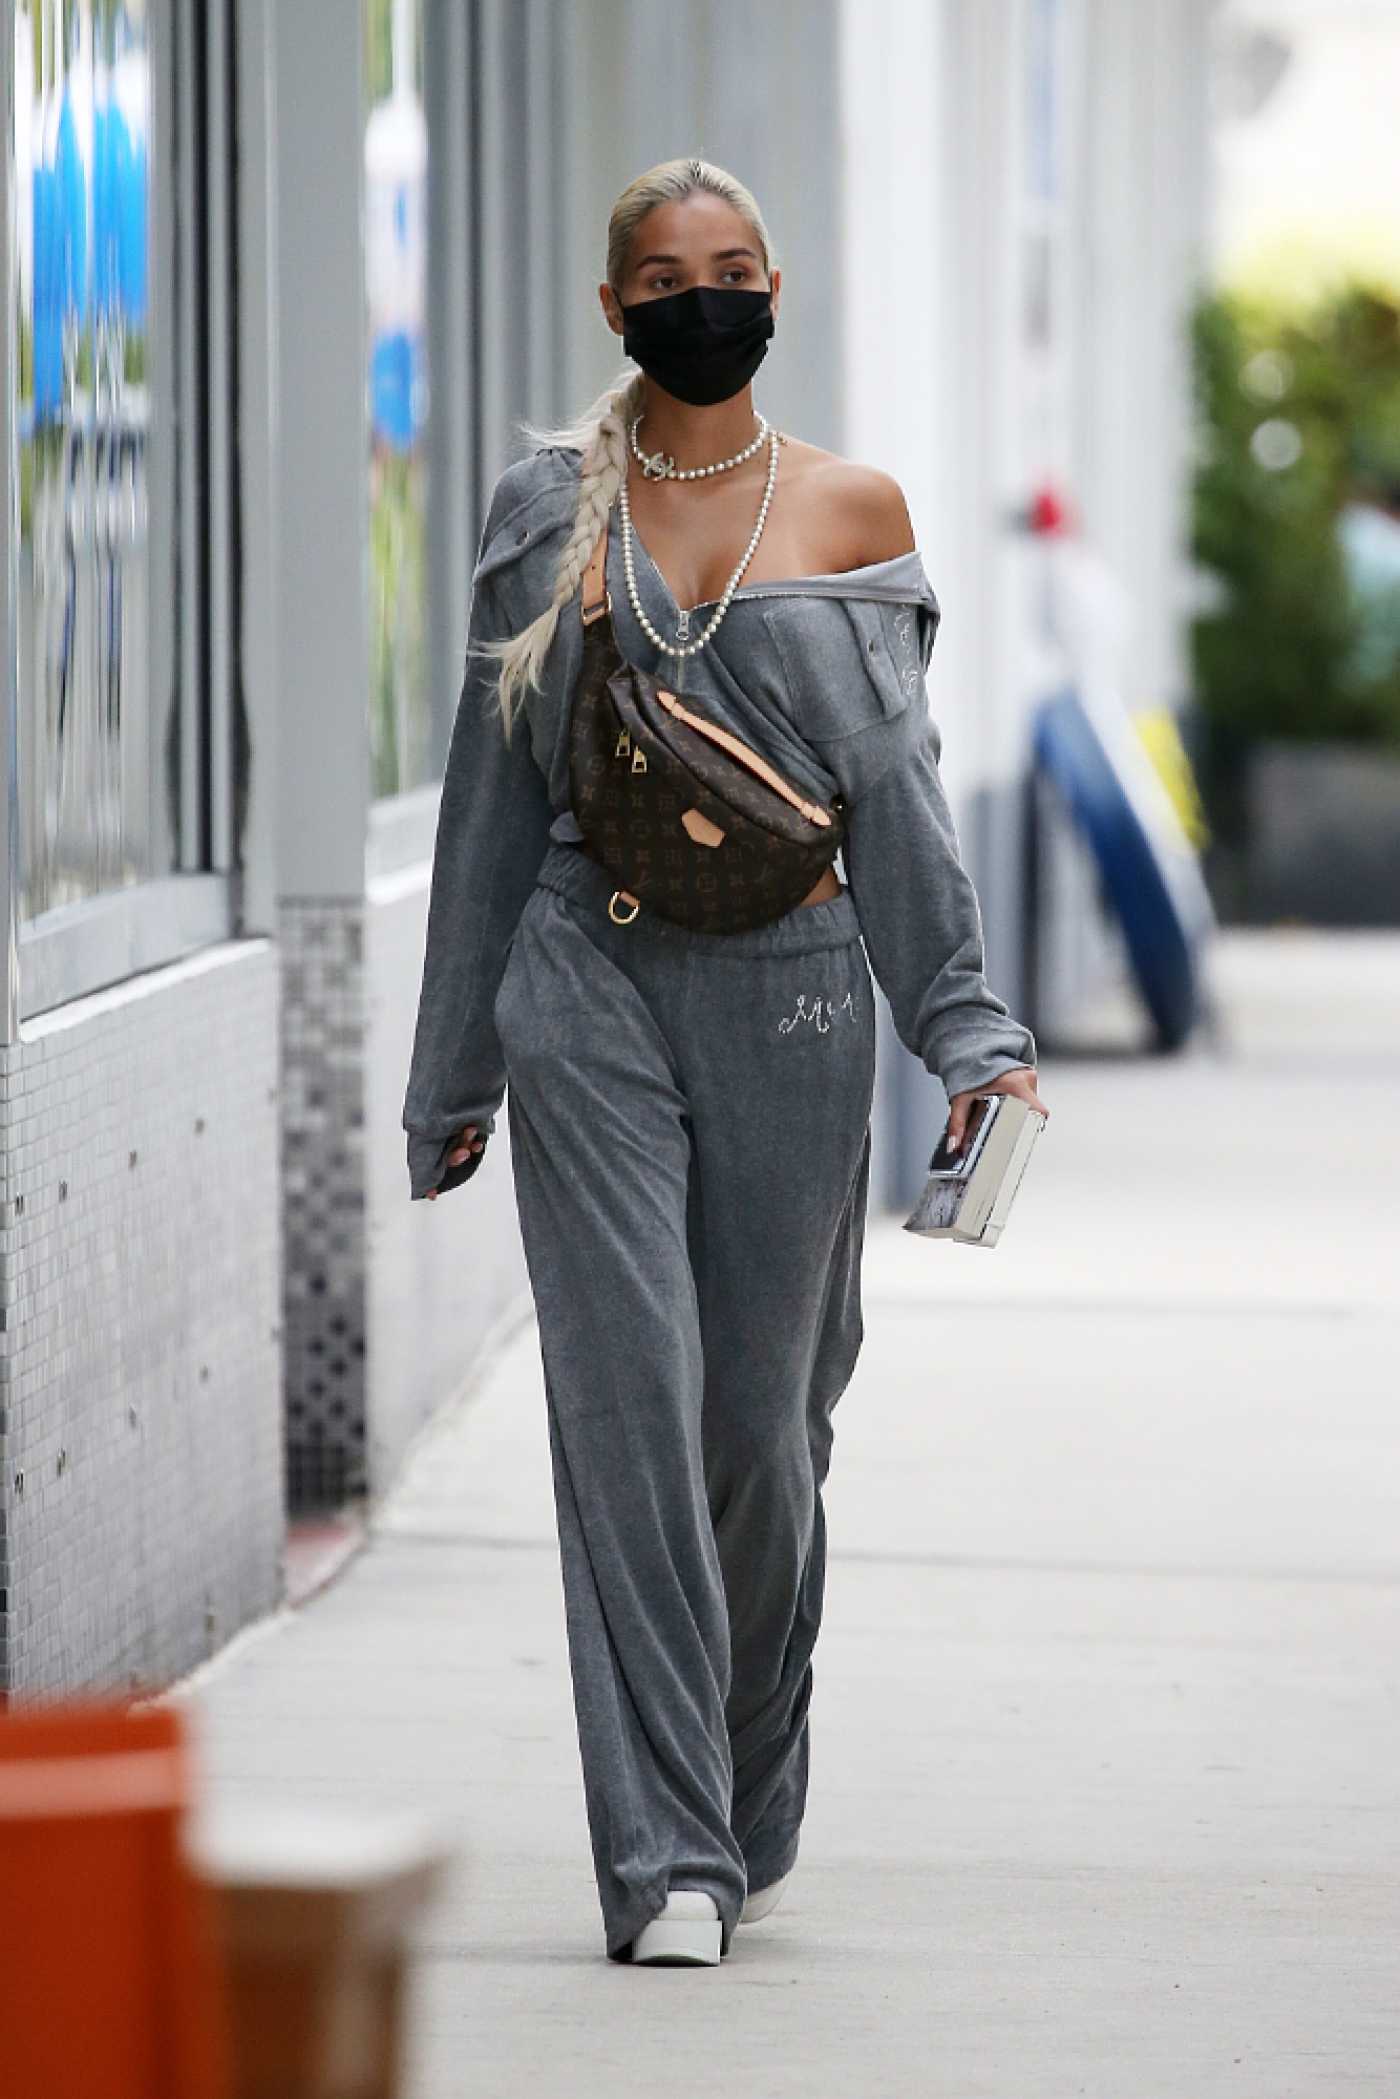 Pia Mia in a Grey Sweatsuit Was Seen Out in Miami 01/10/2021